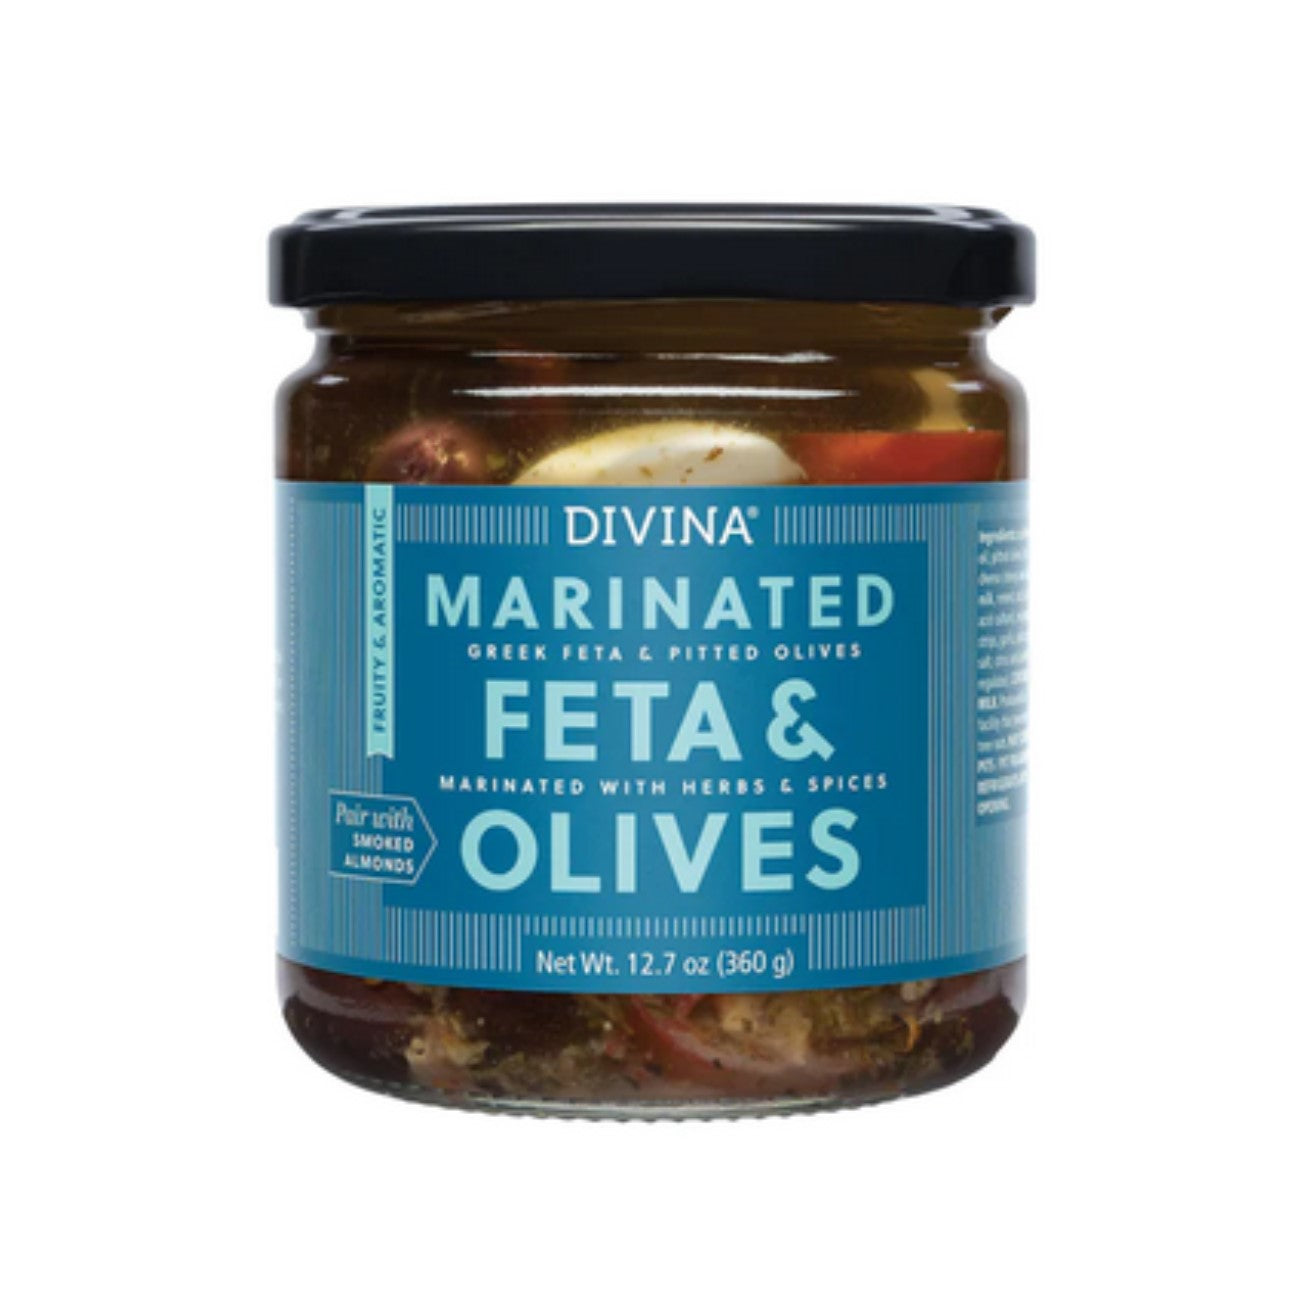 Divina Marinated Feta & Olives with Herbs & Spices